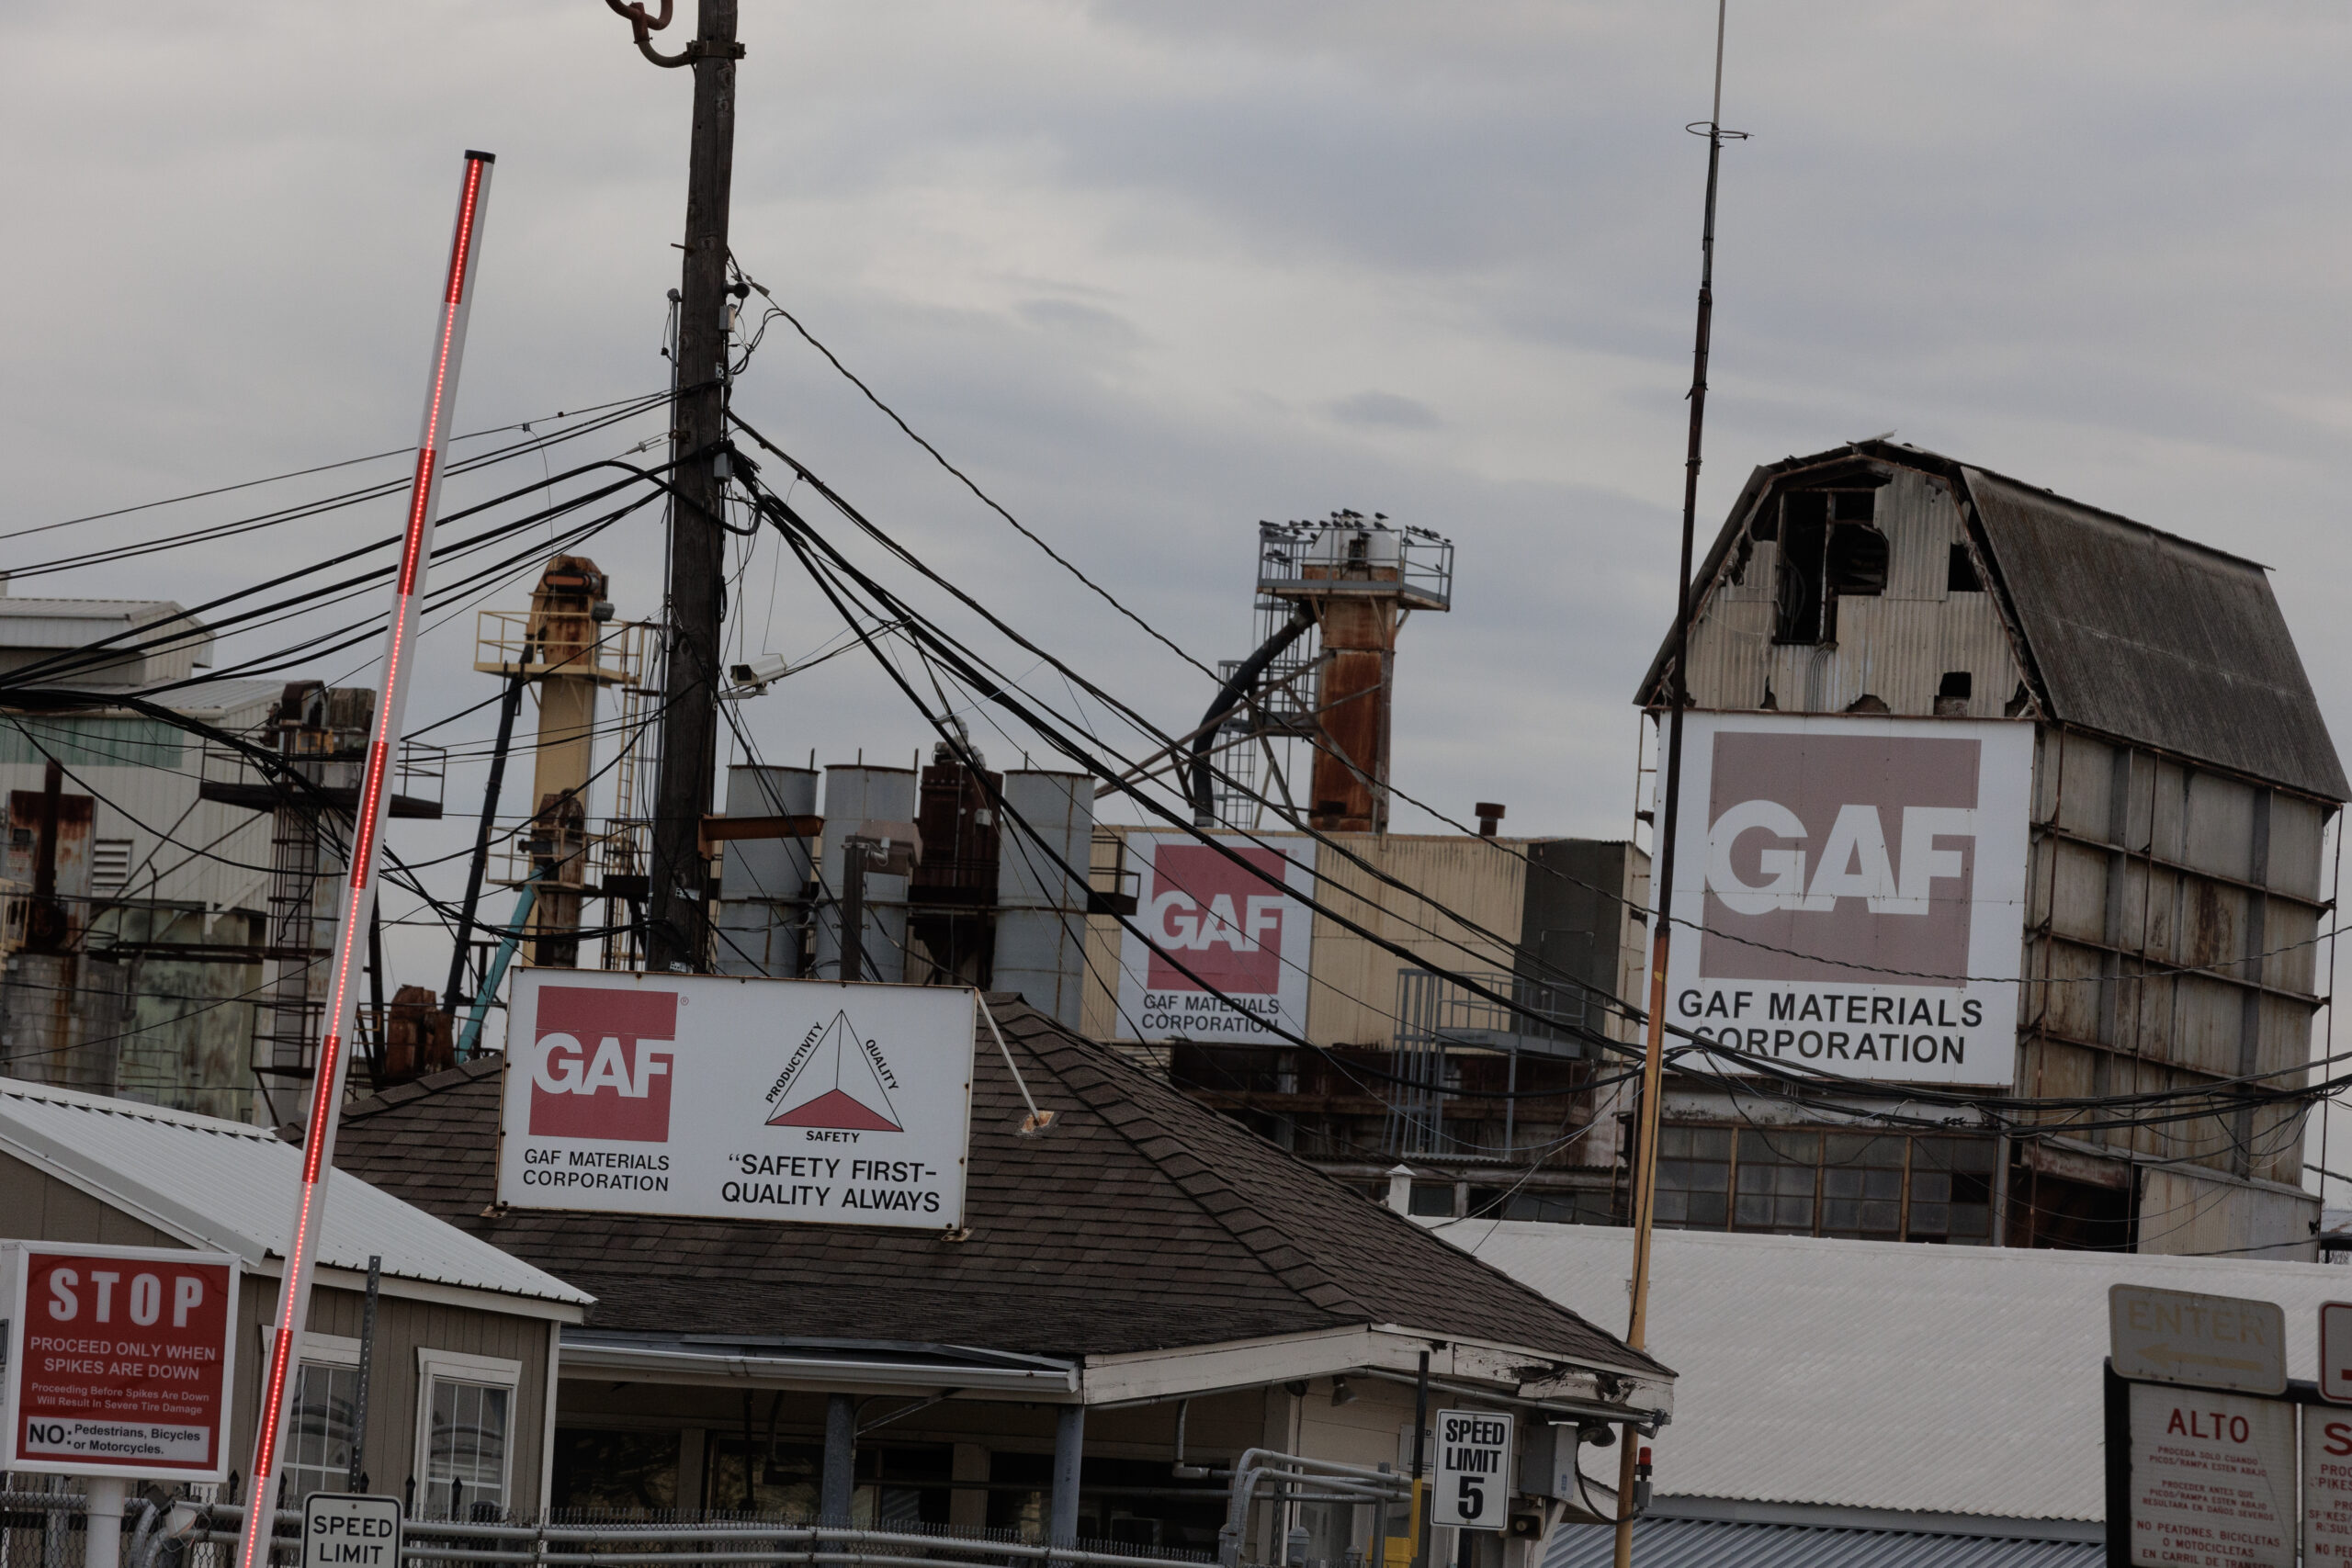 A photo of the GAF roofing and shingle factory, with its own shingled roof, on a cloudy day.